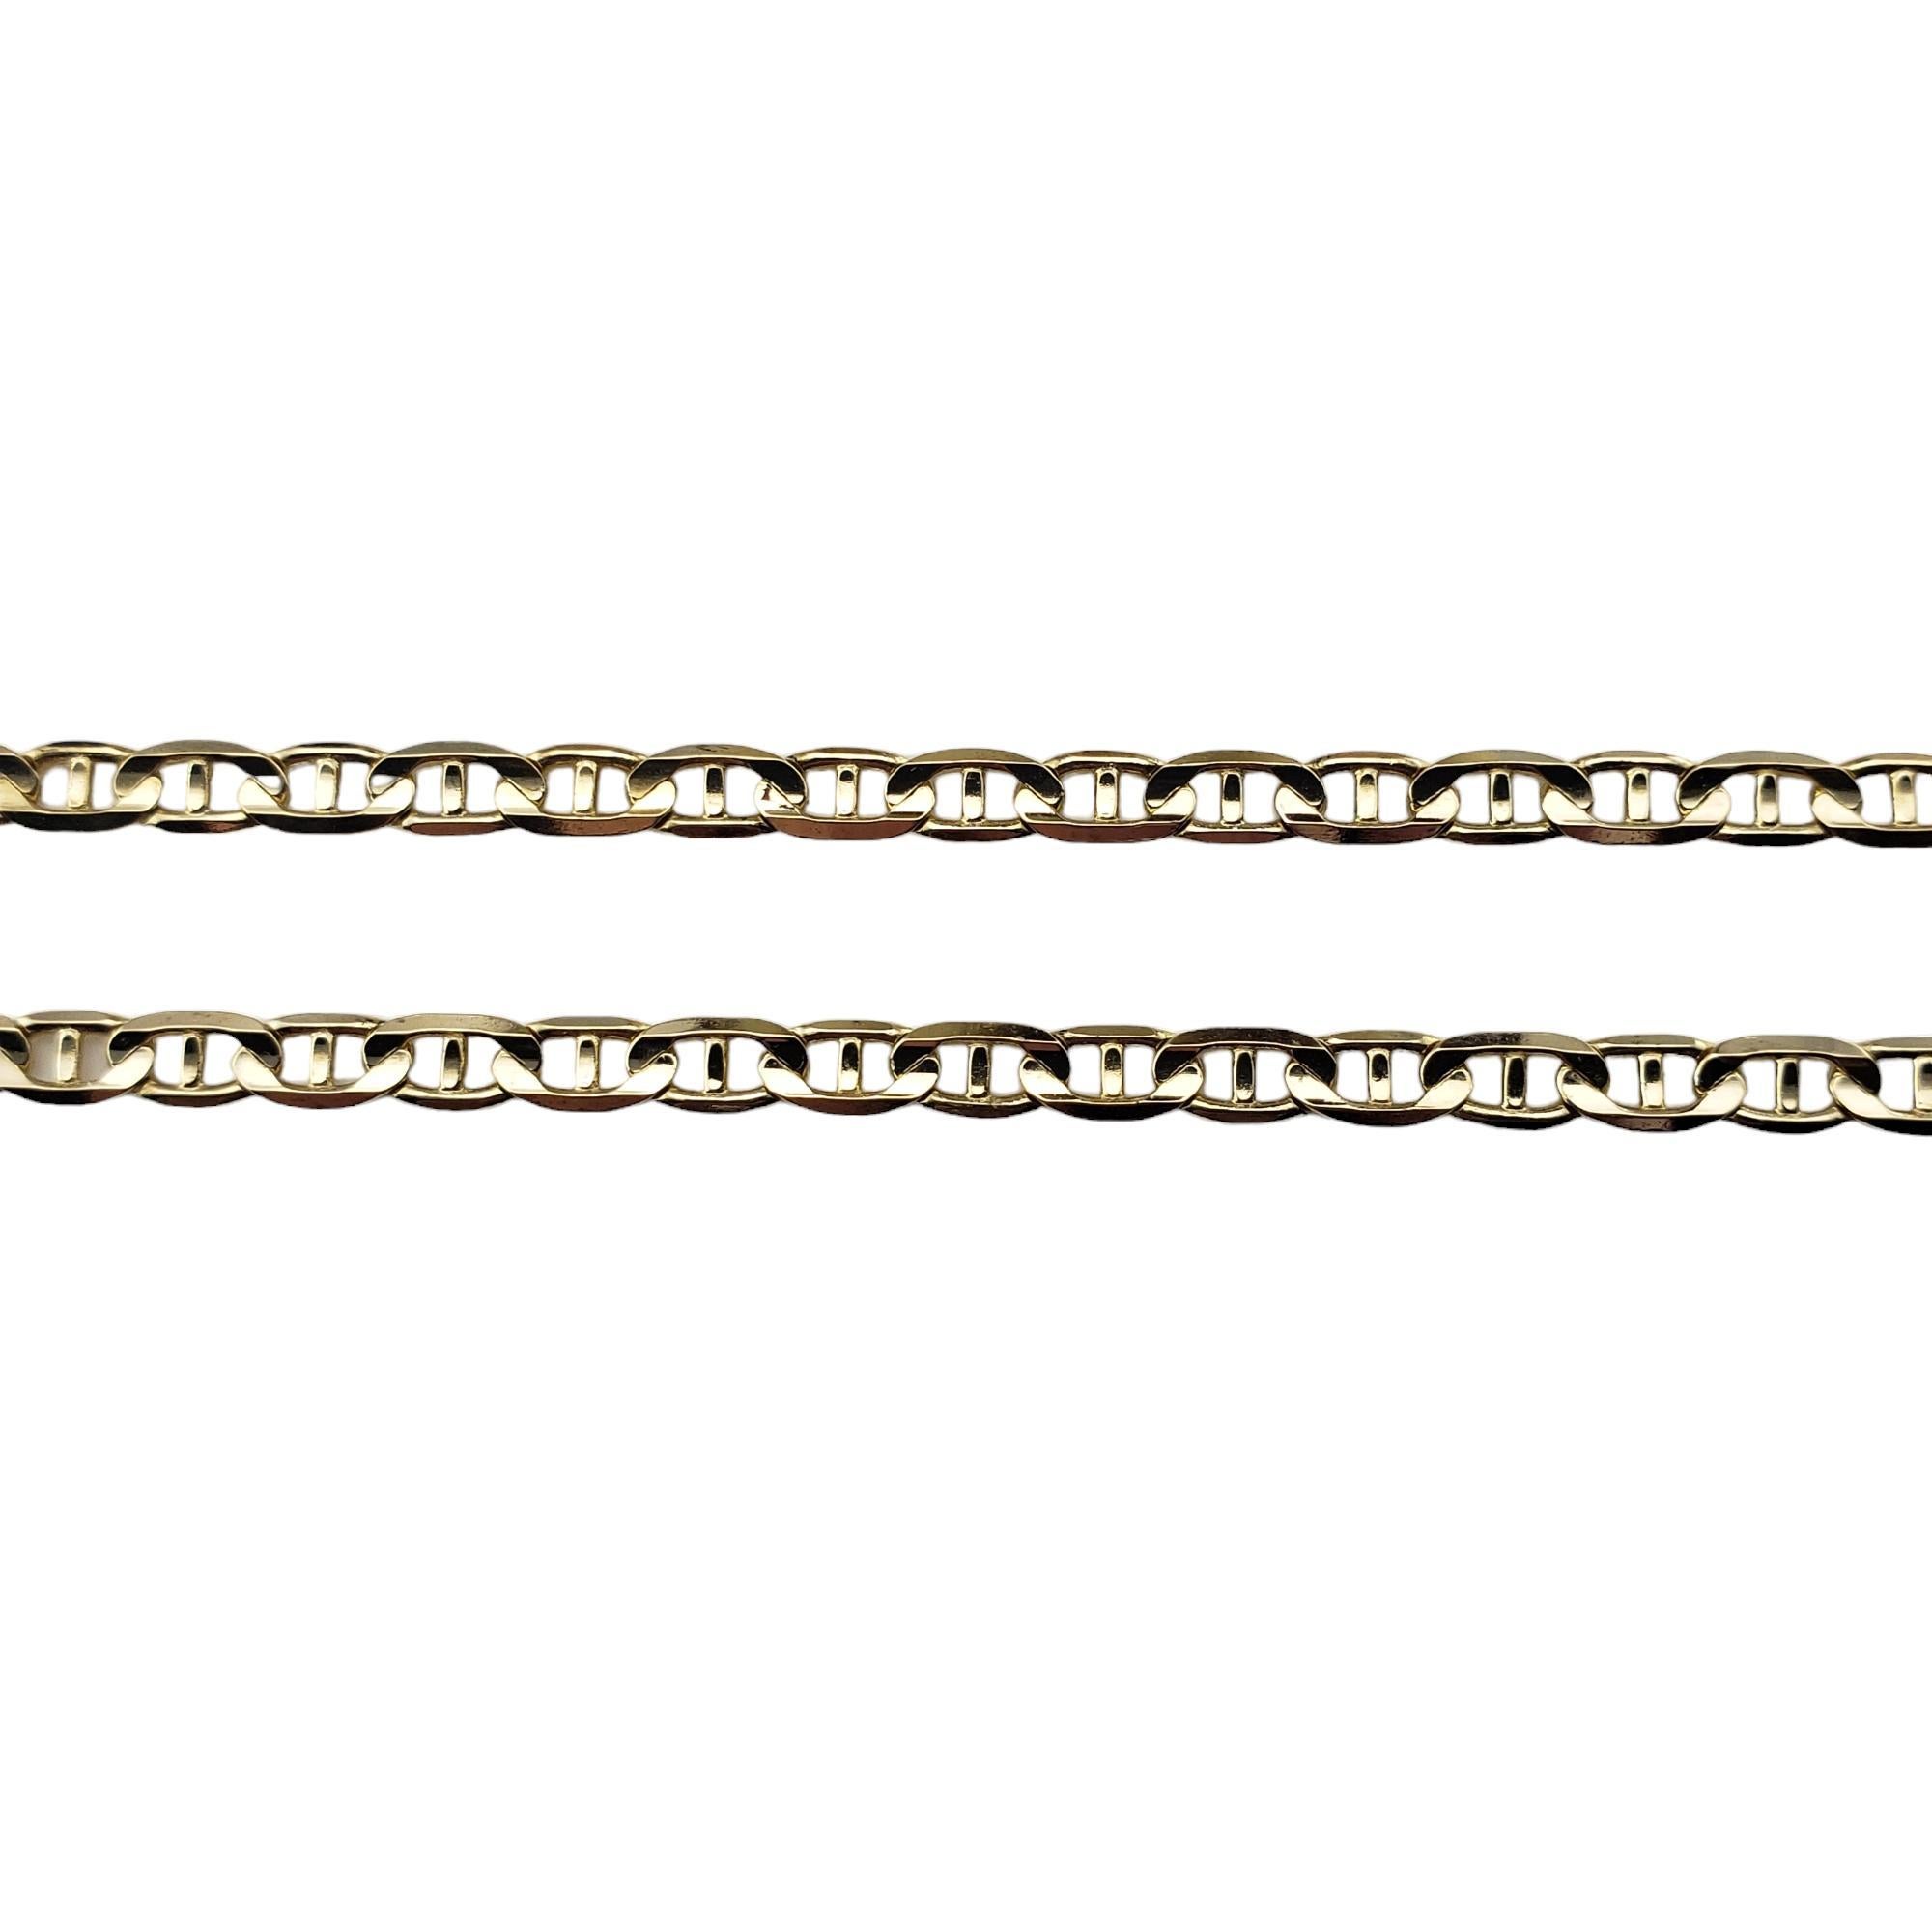 Vintage 14 Karat Yellow Gold Mariner  Link Necklace-

This elegant mariner link necklace is crafted in meticulously detailed 14K yellow gold.  Width:  3 mm.

Size: 24.5 inches

Stamped: 14K

Weight:  10.2 gr./ 6.5 dwt.

Very good condition,